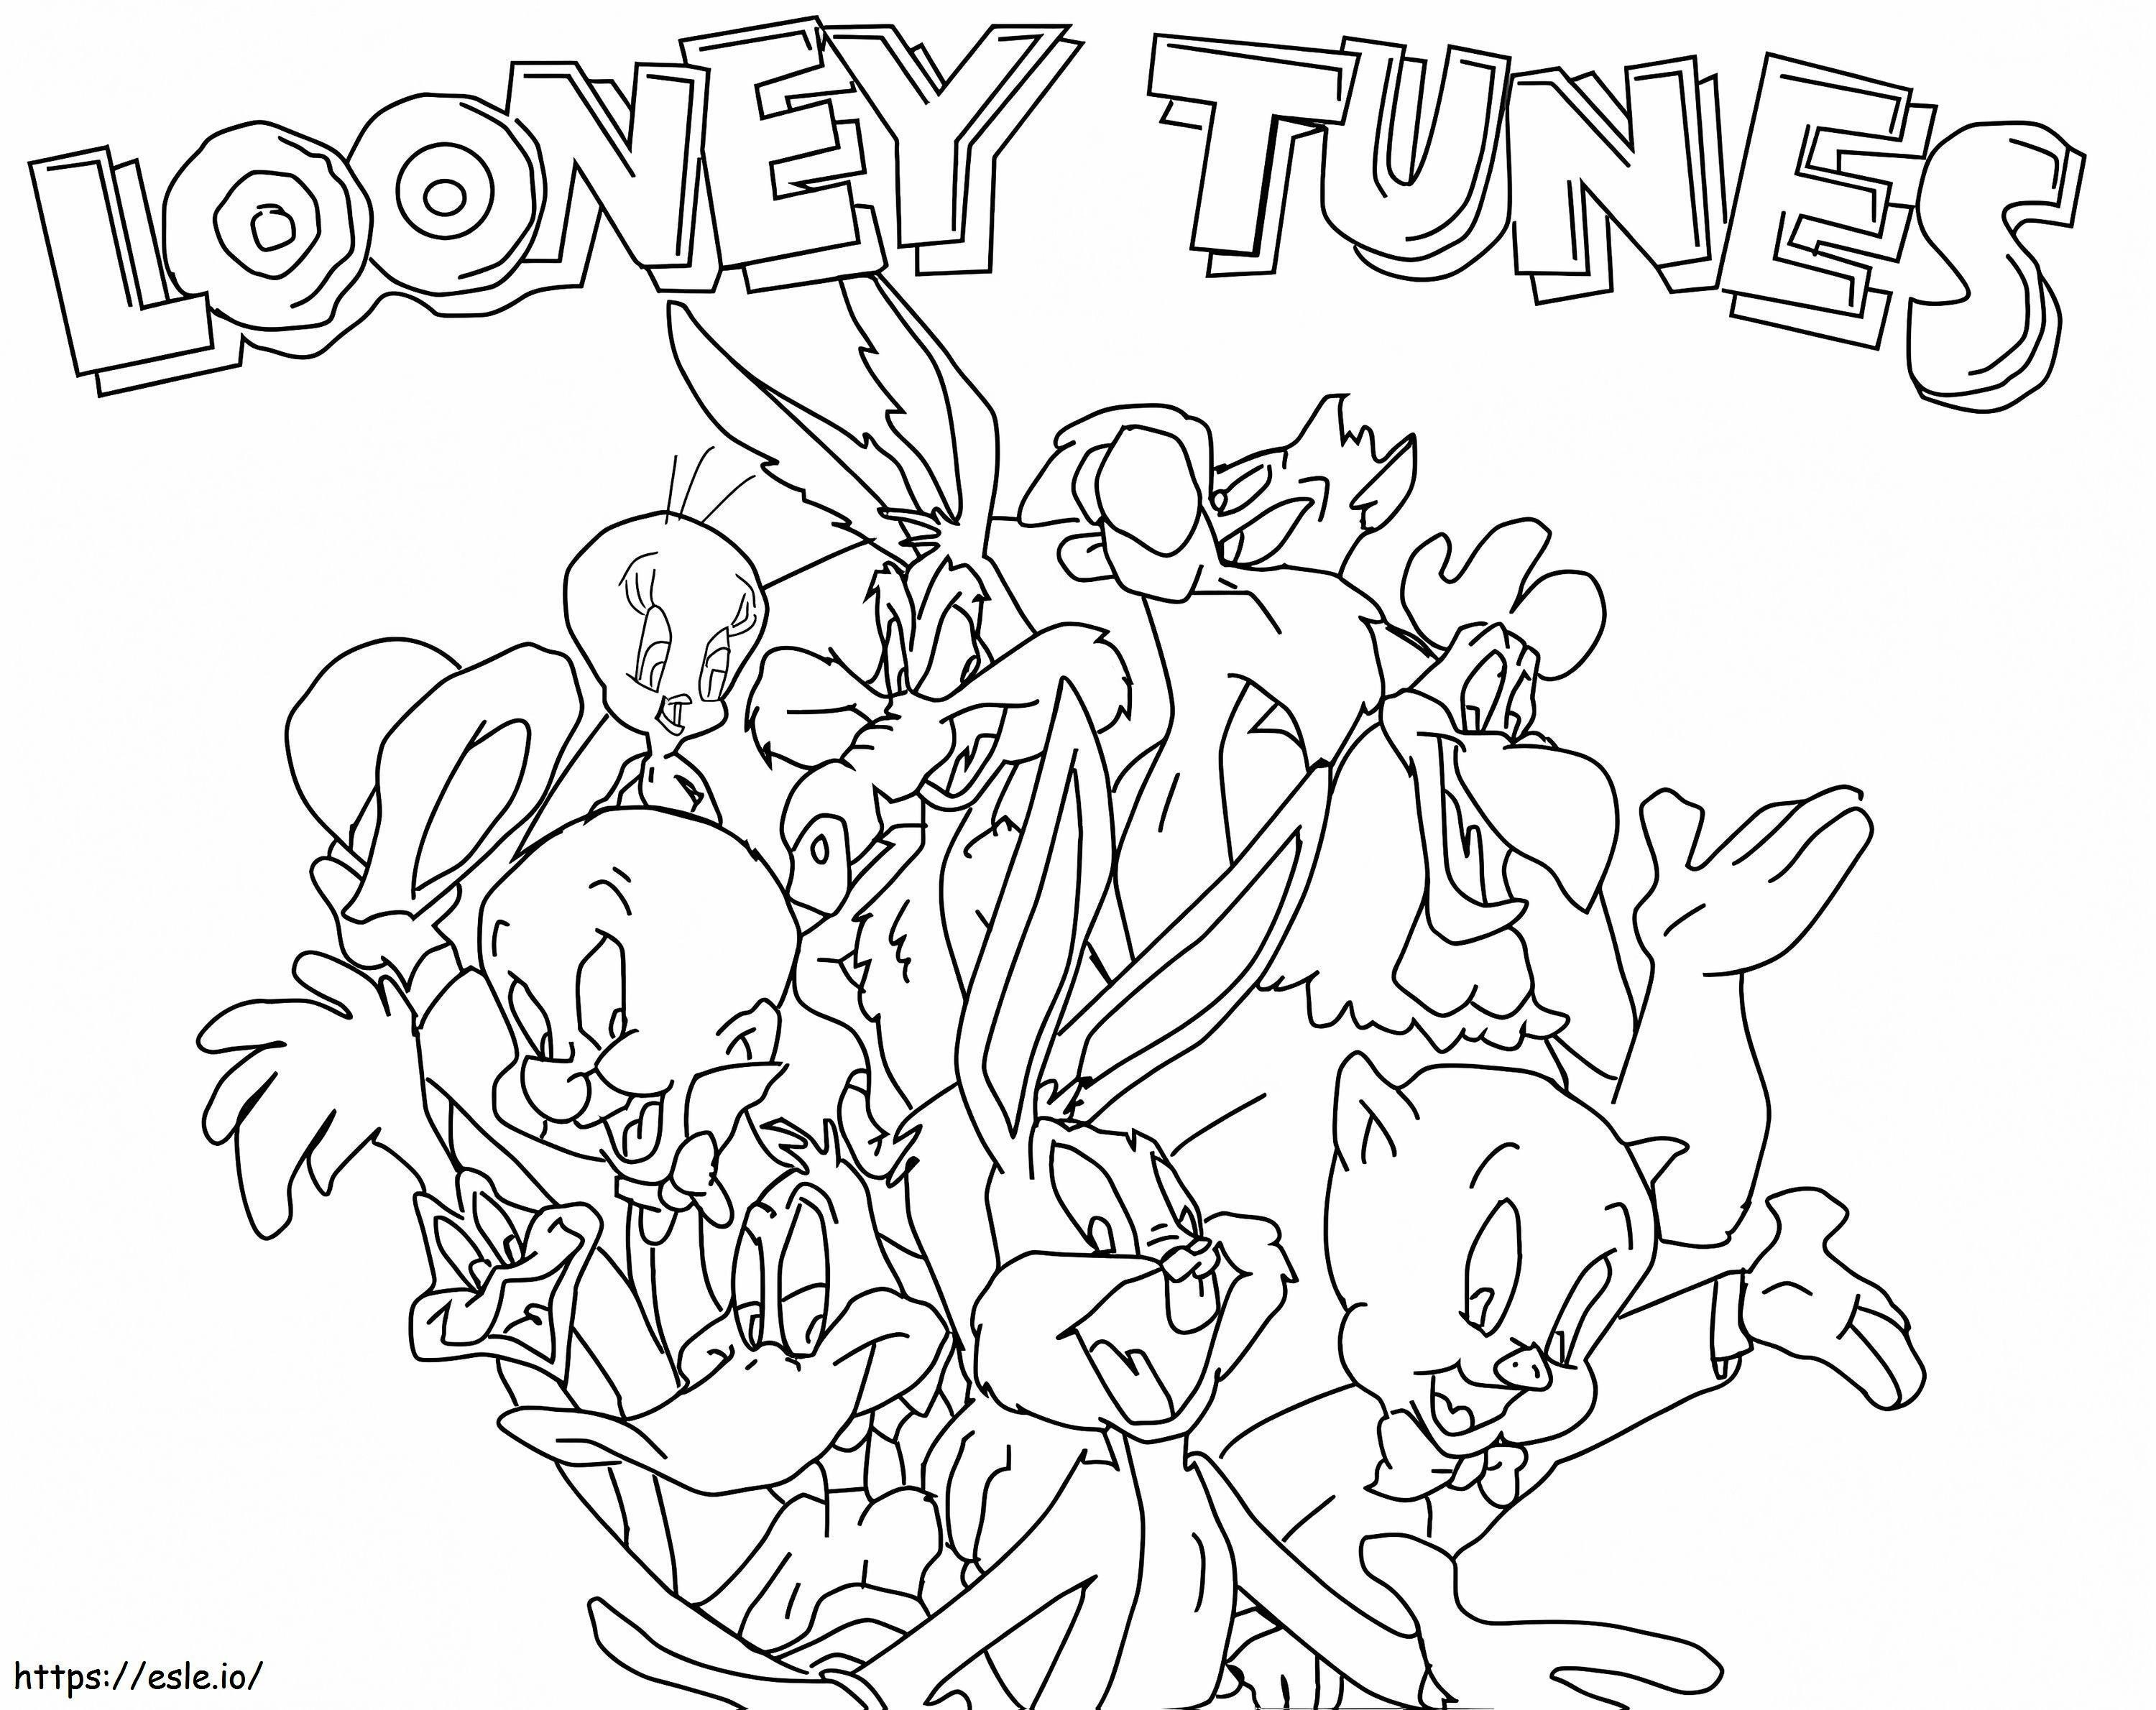 Looney Tunes coloring page